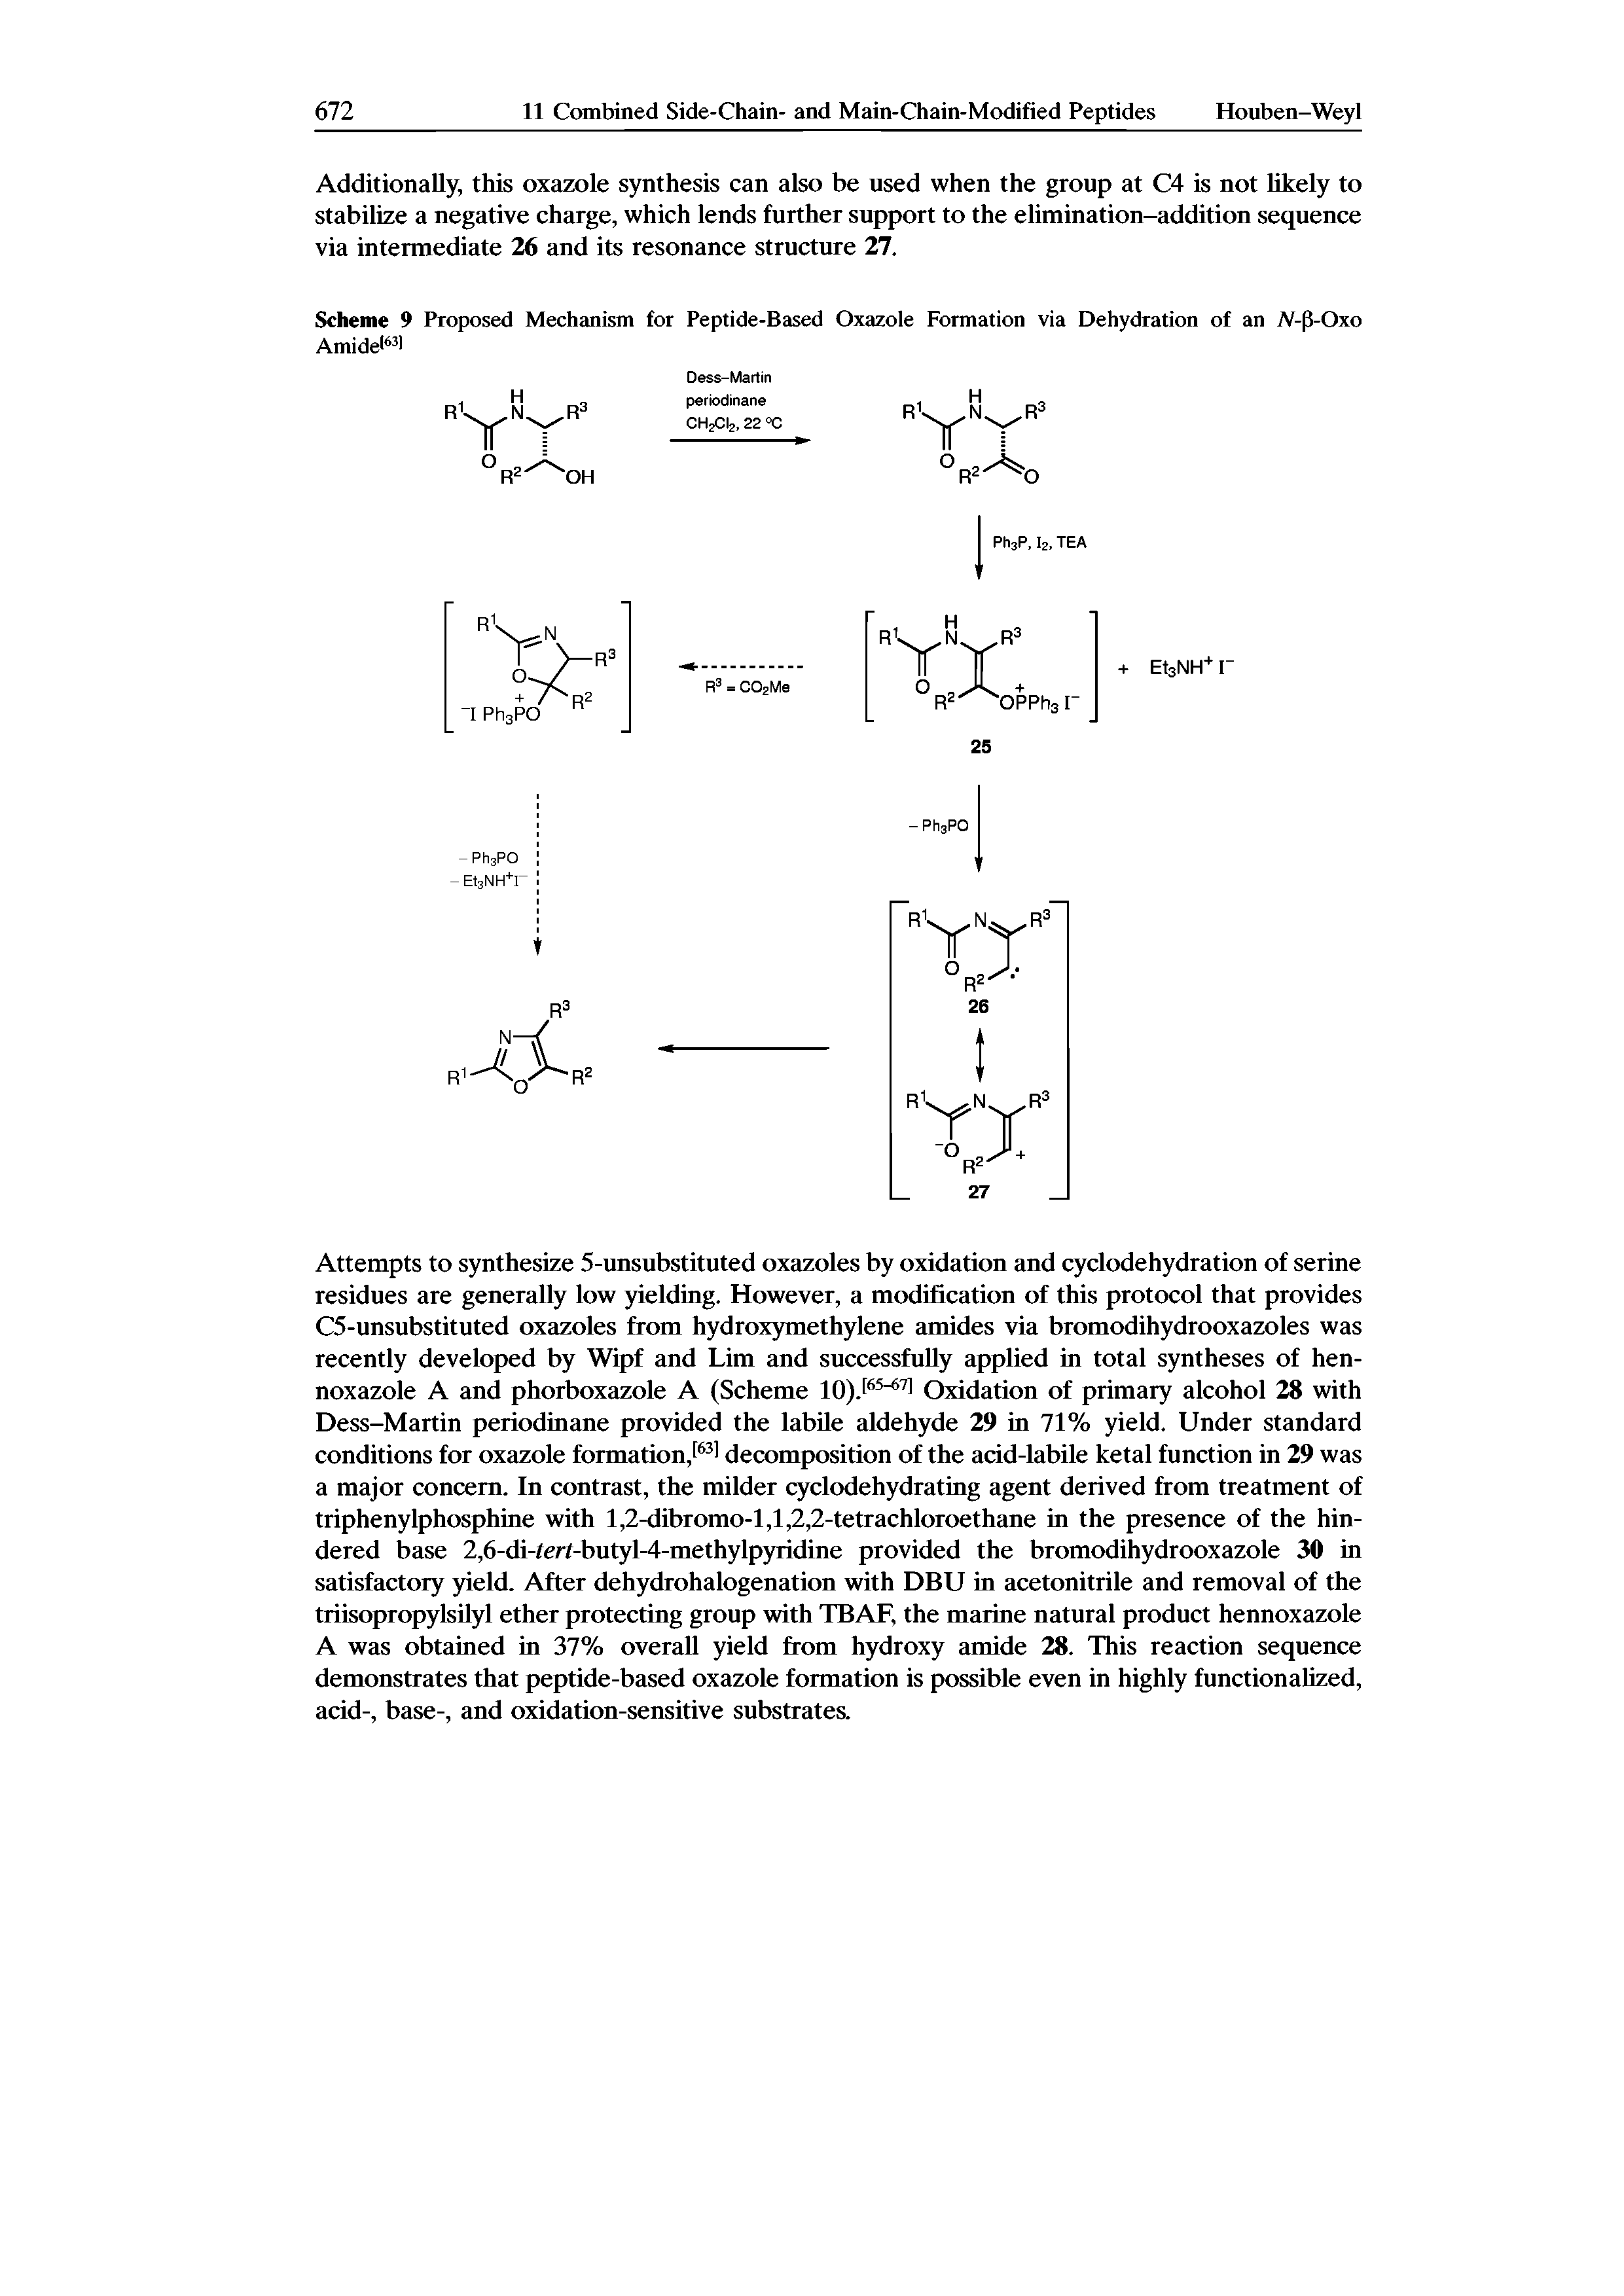 Scheme 9 Proposed Mechanism for Peptide-Based Oxazole Formation via Dehydration of an /V-fS-Oxo Amide1631...